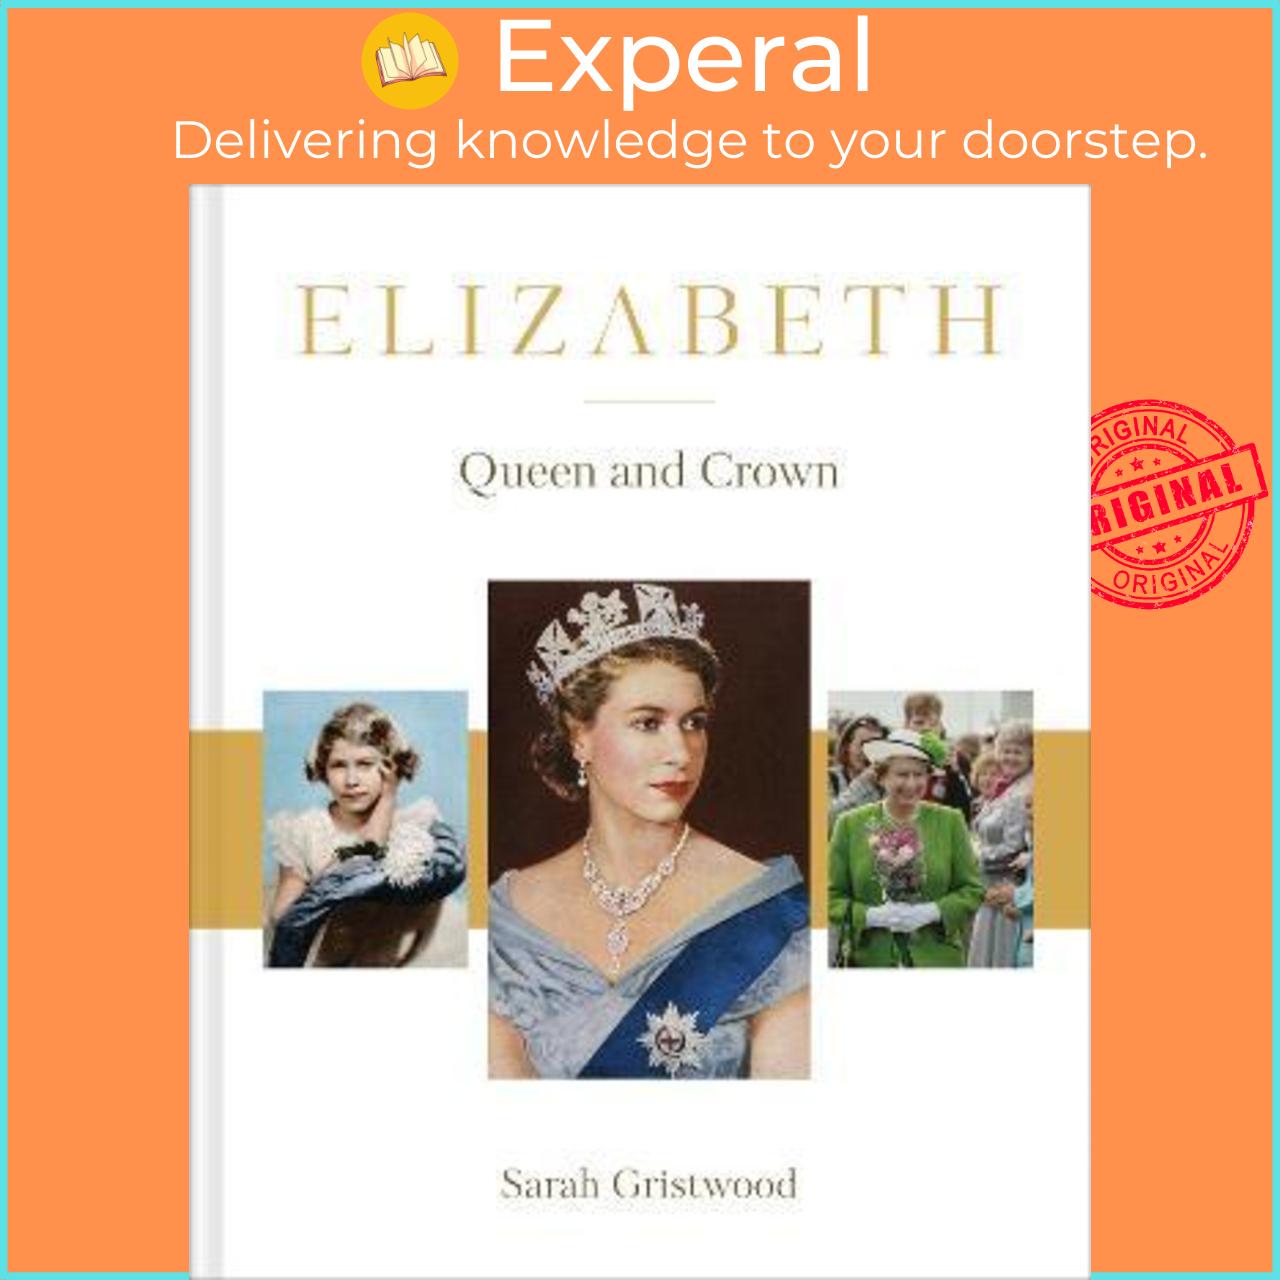 Sách - Elizabeth : Queen and Crown by Sarah Gristwood (UK edition, hardcover)